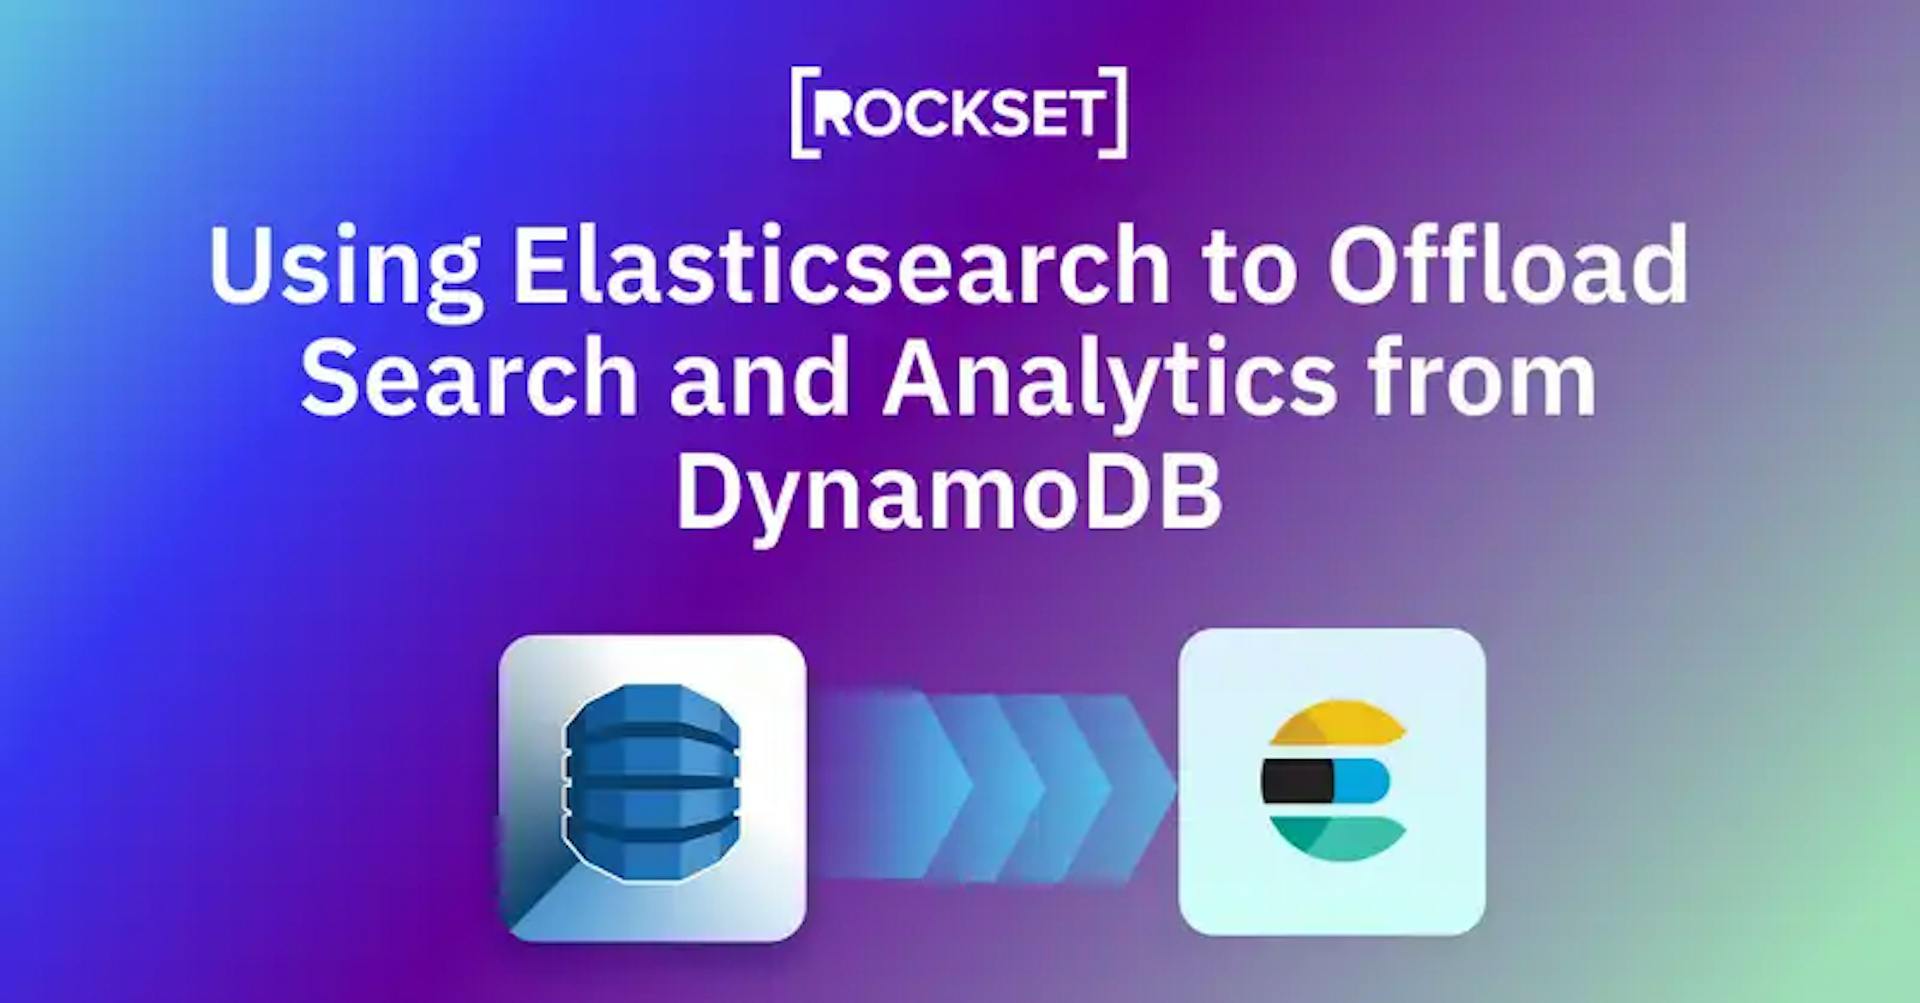 featured image - Using Elasticsearch to Offload Search and Analytics from DynamoDB: Pros and Cons